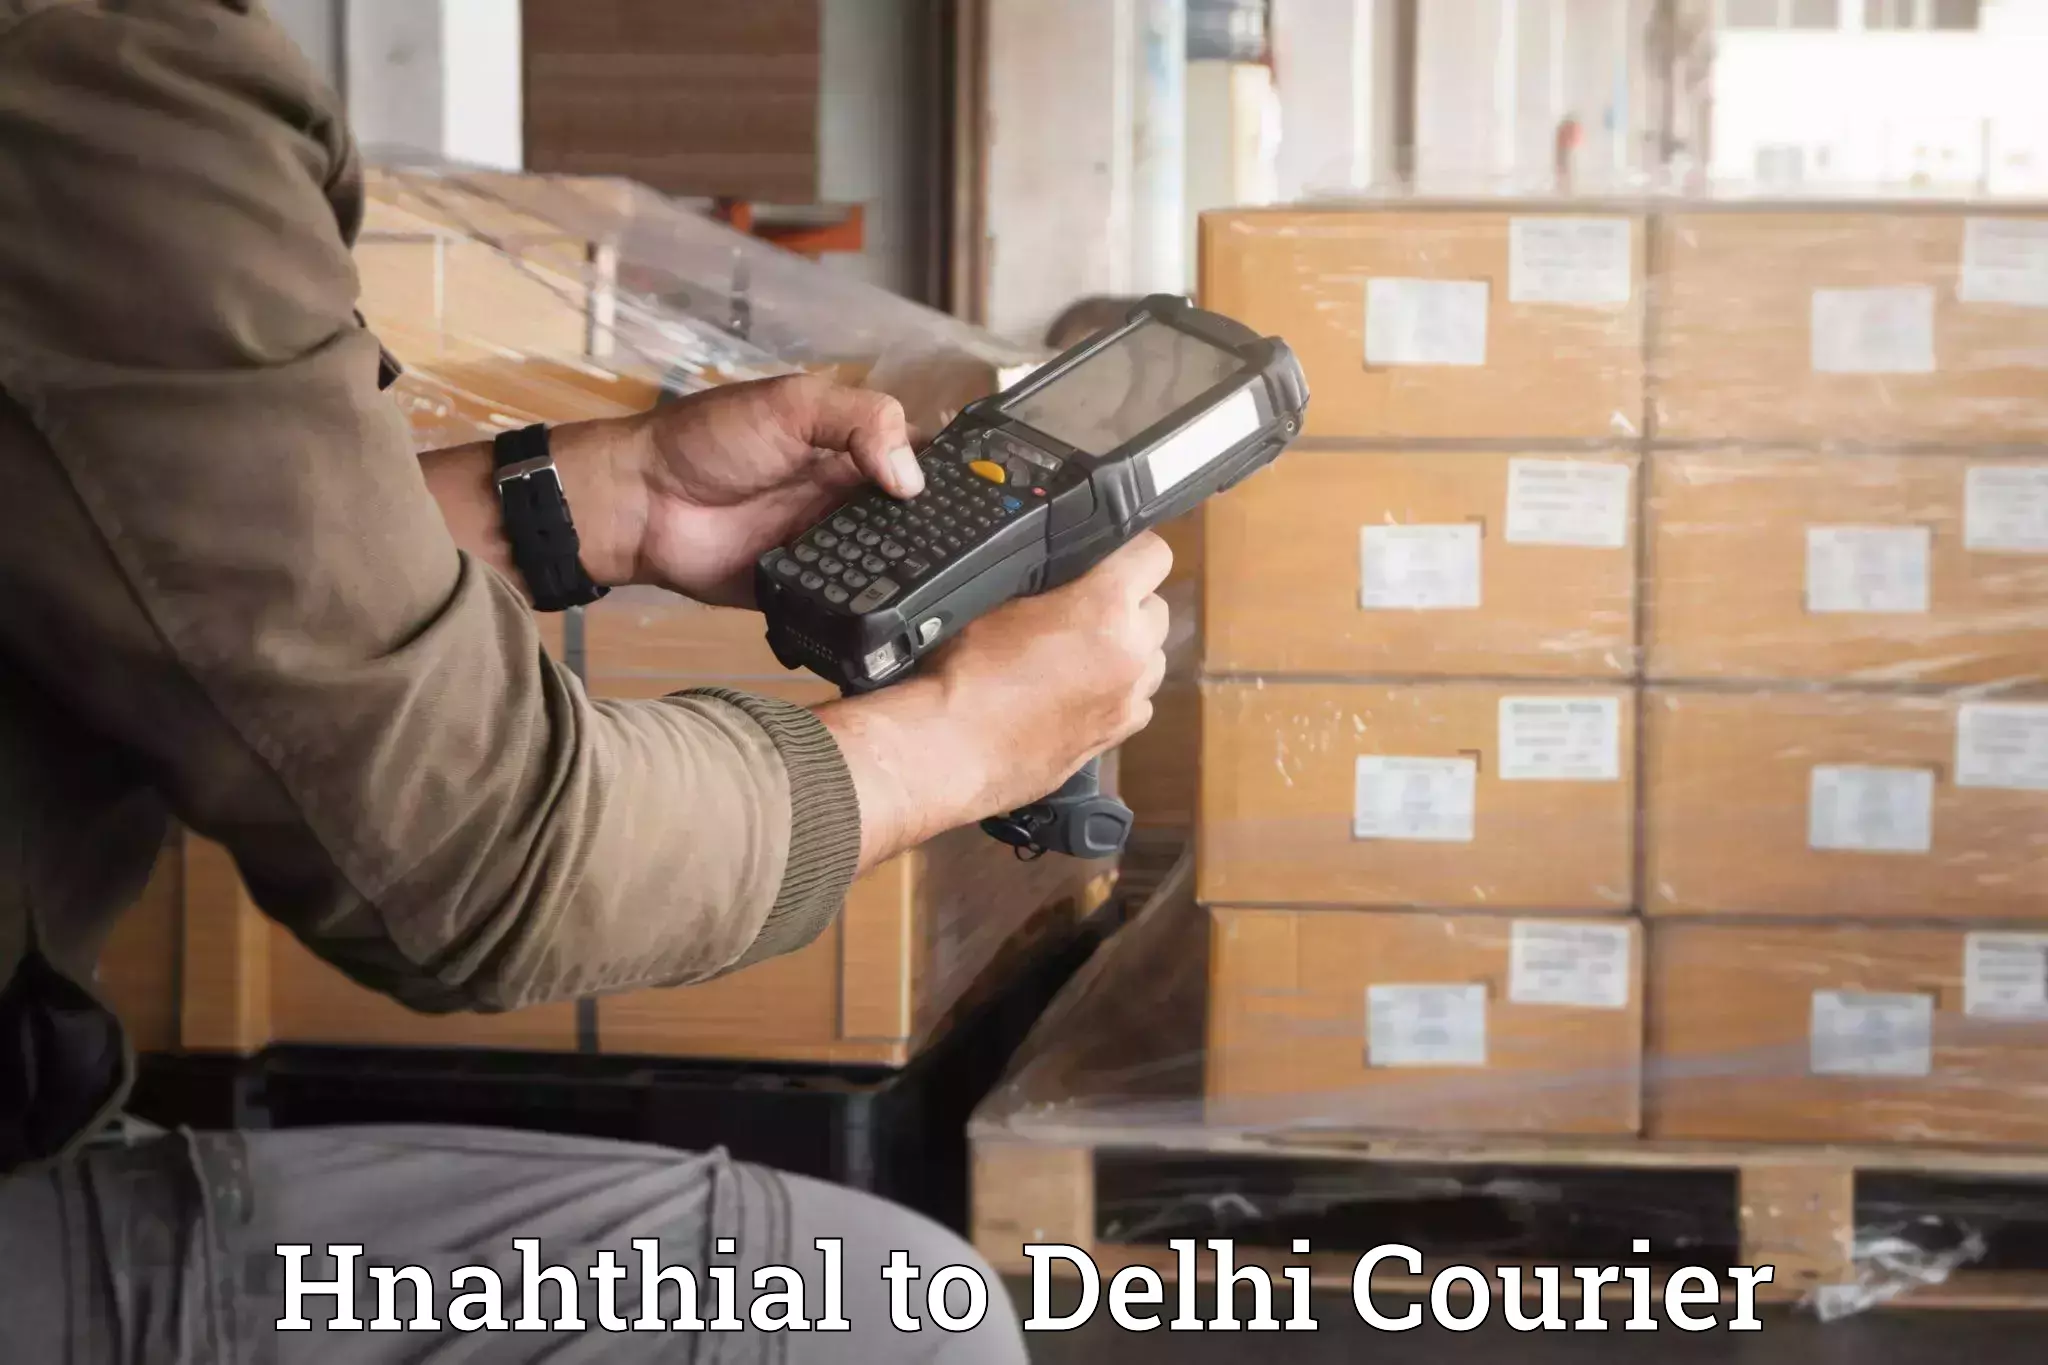 Furniture relocation experts Hnahthial to Delhi